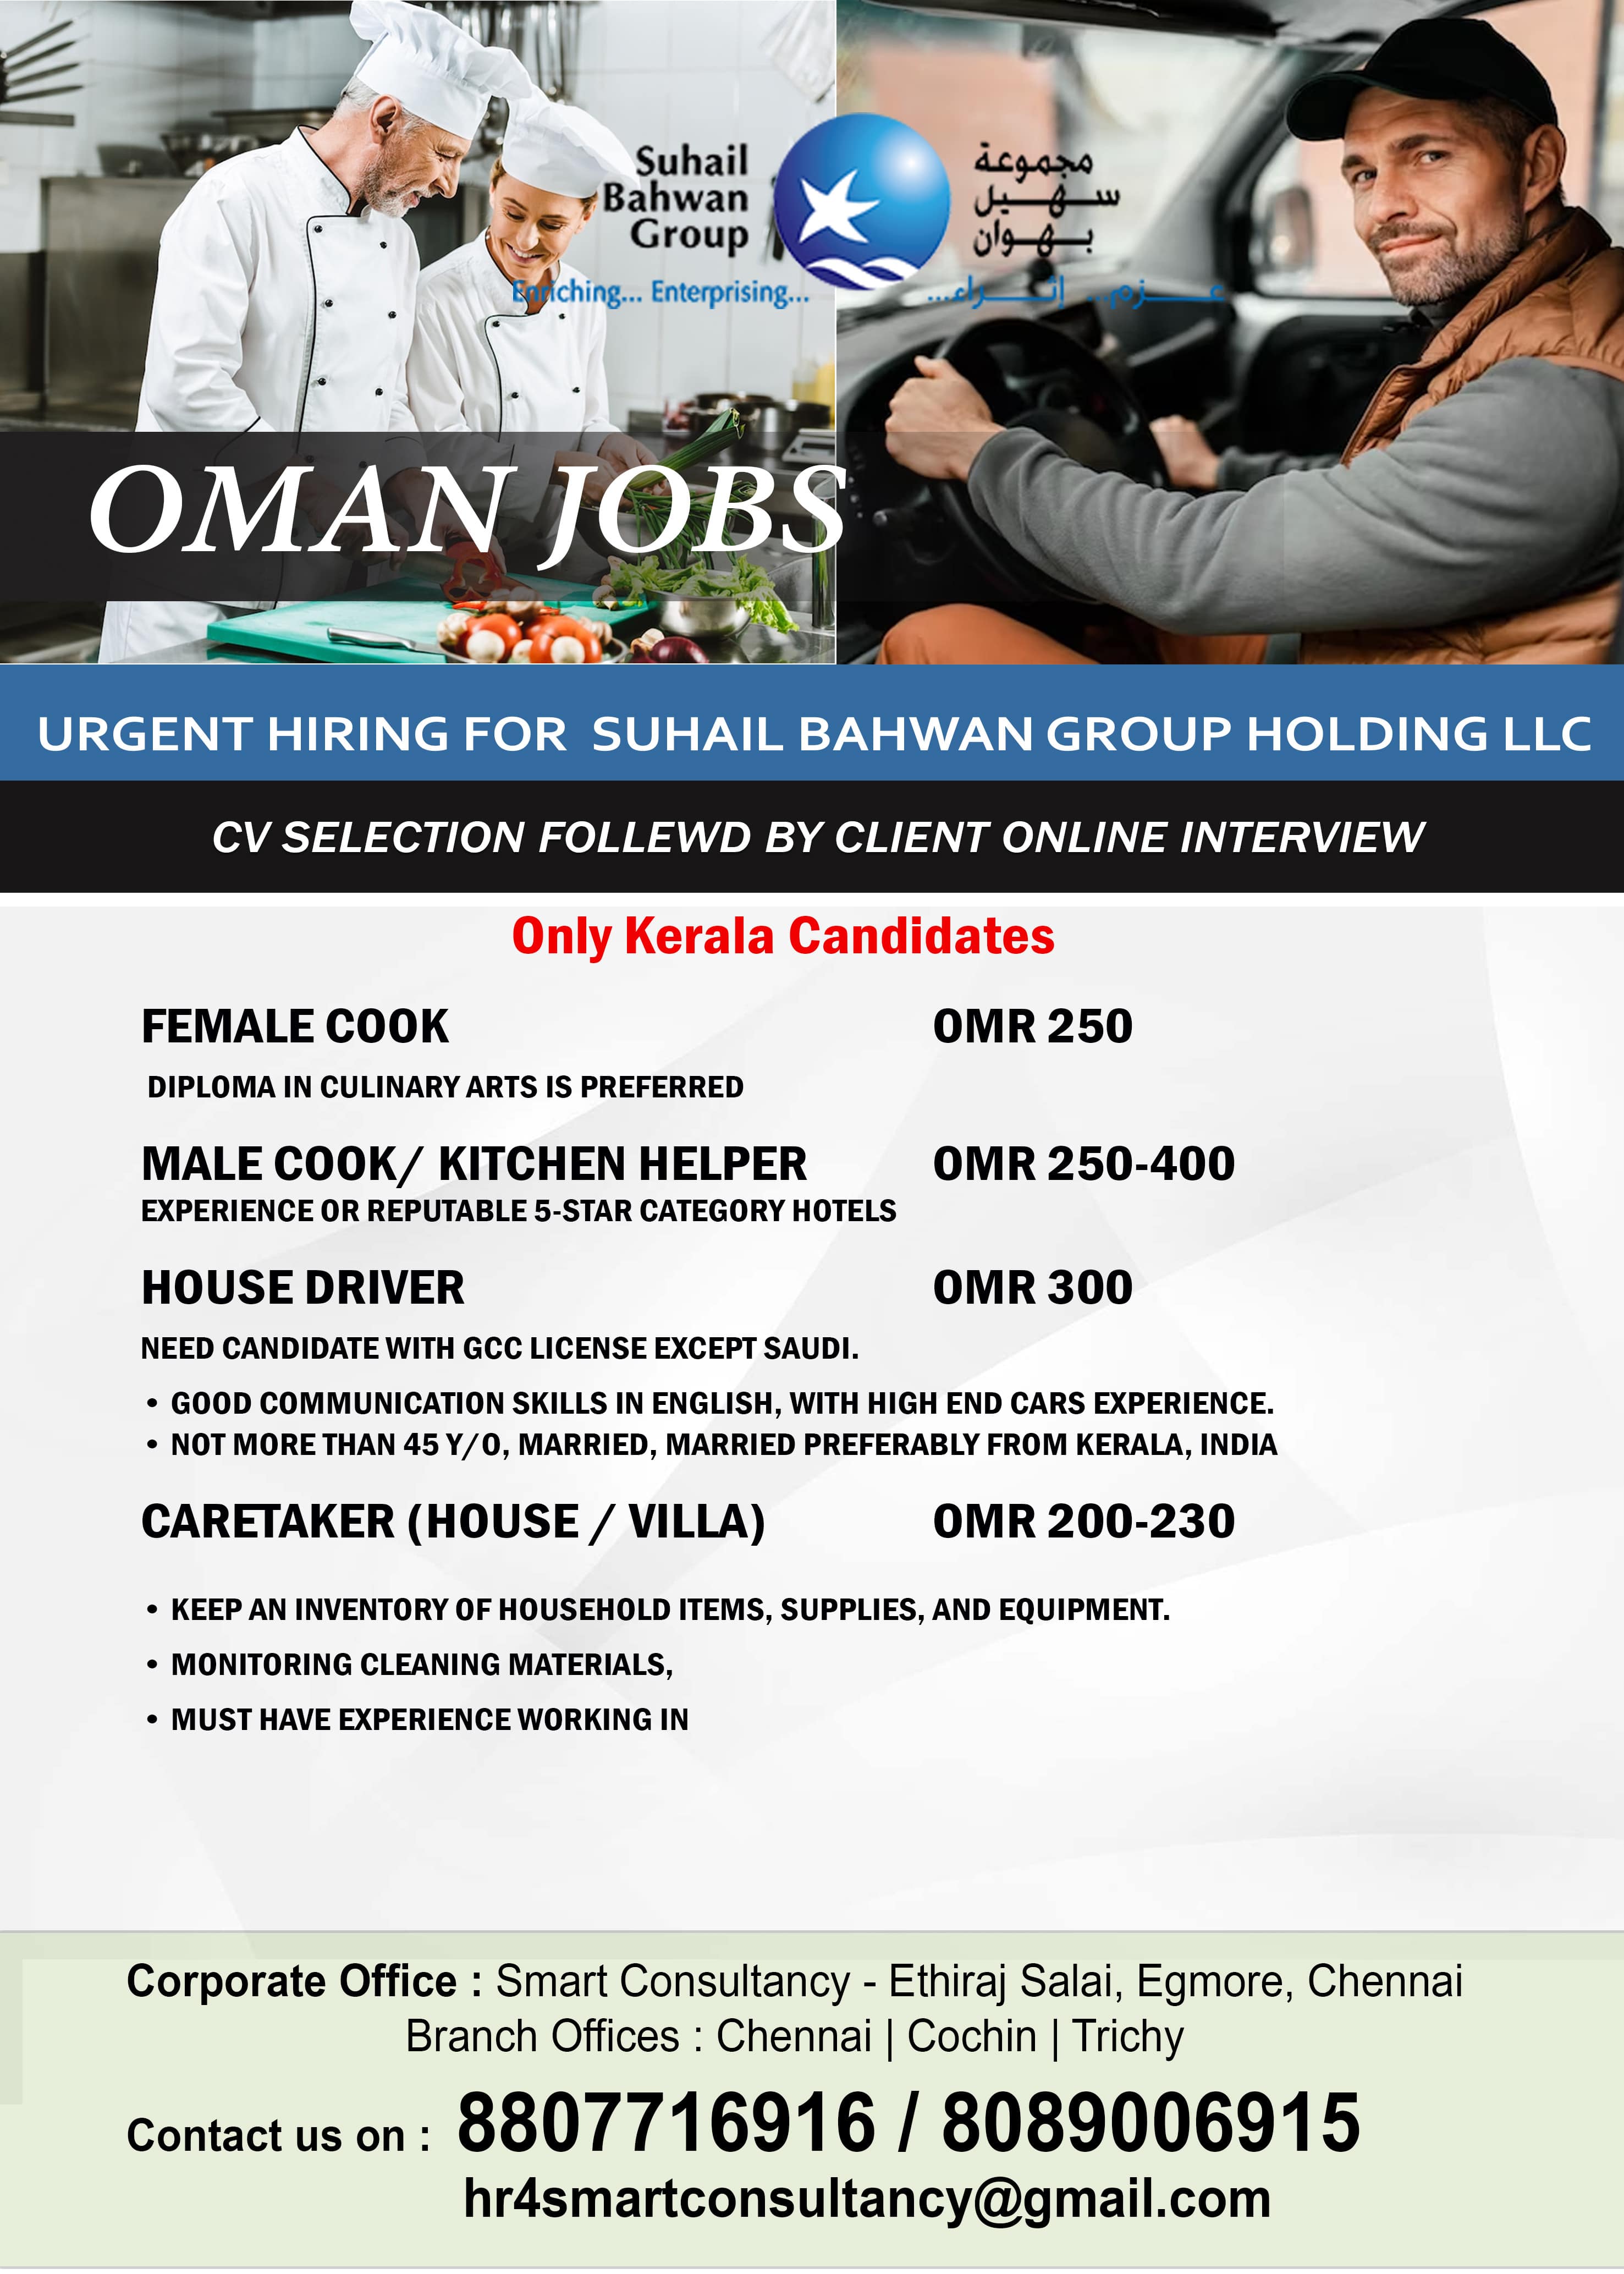 Suhail Bahwan Group Holding LLC - Oman CV SELECTION FOLLEWD BY CLIENT ONLINE INTERVIEW